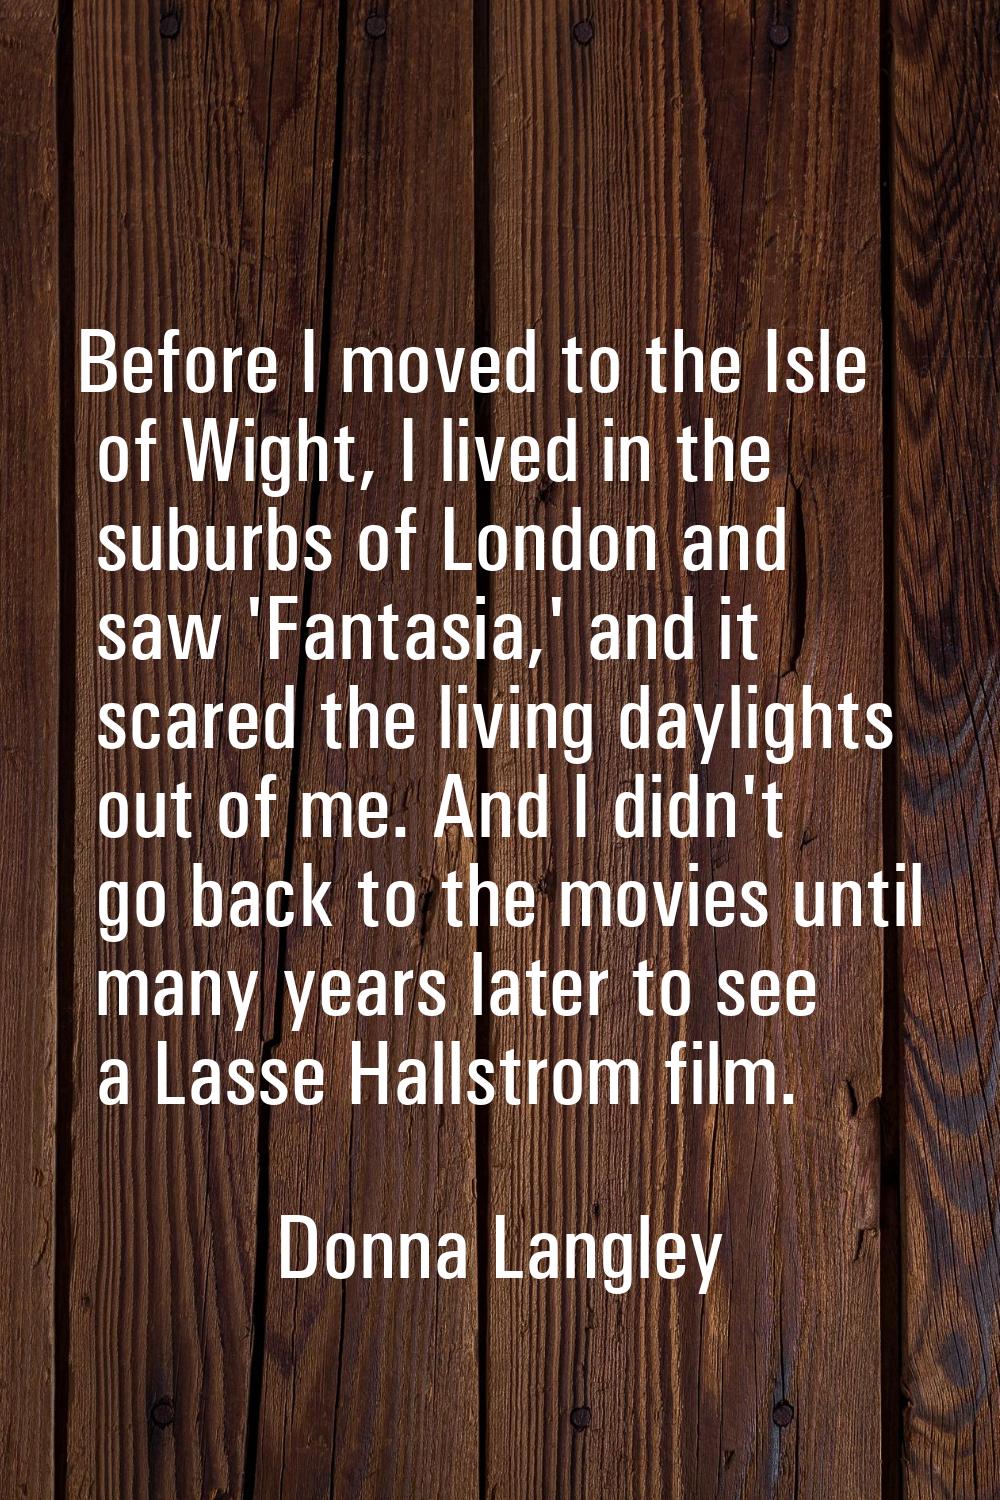 Before I moved to the Isle of Wight, I lived in the suburbs of London and saw 'Fantasia,' and it sc